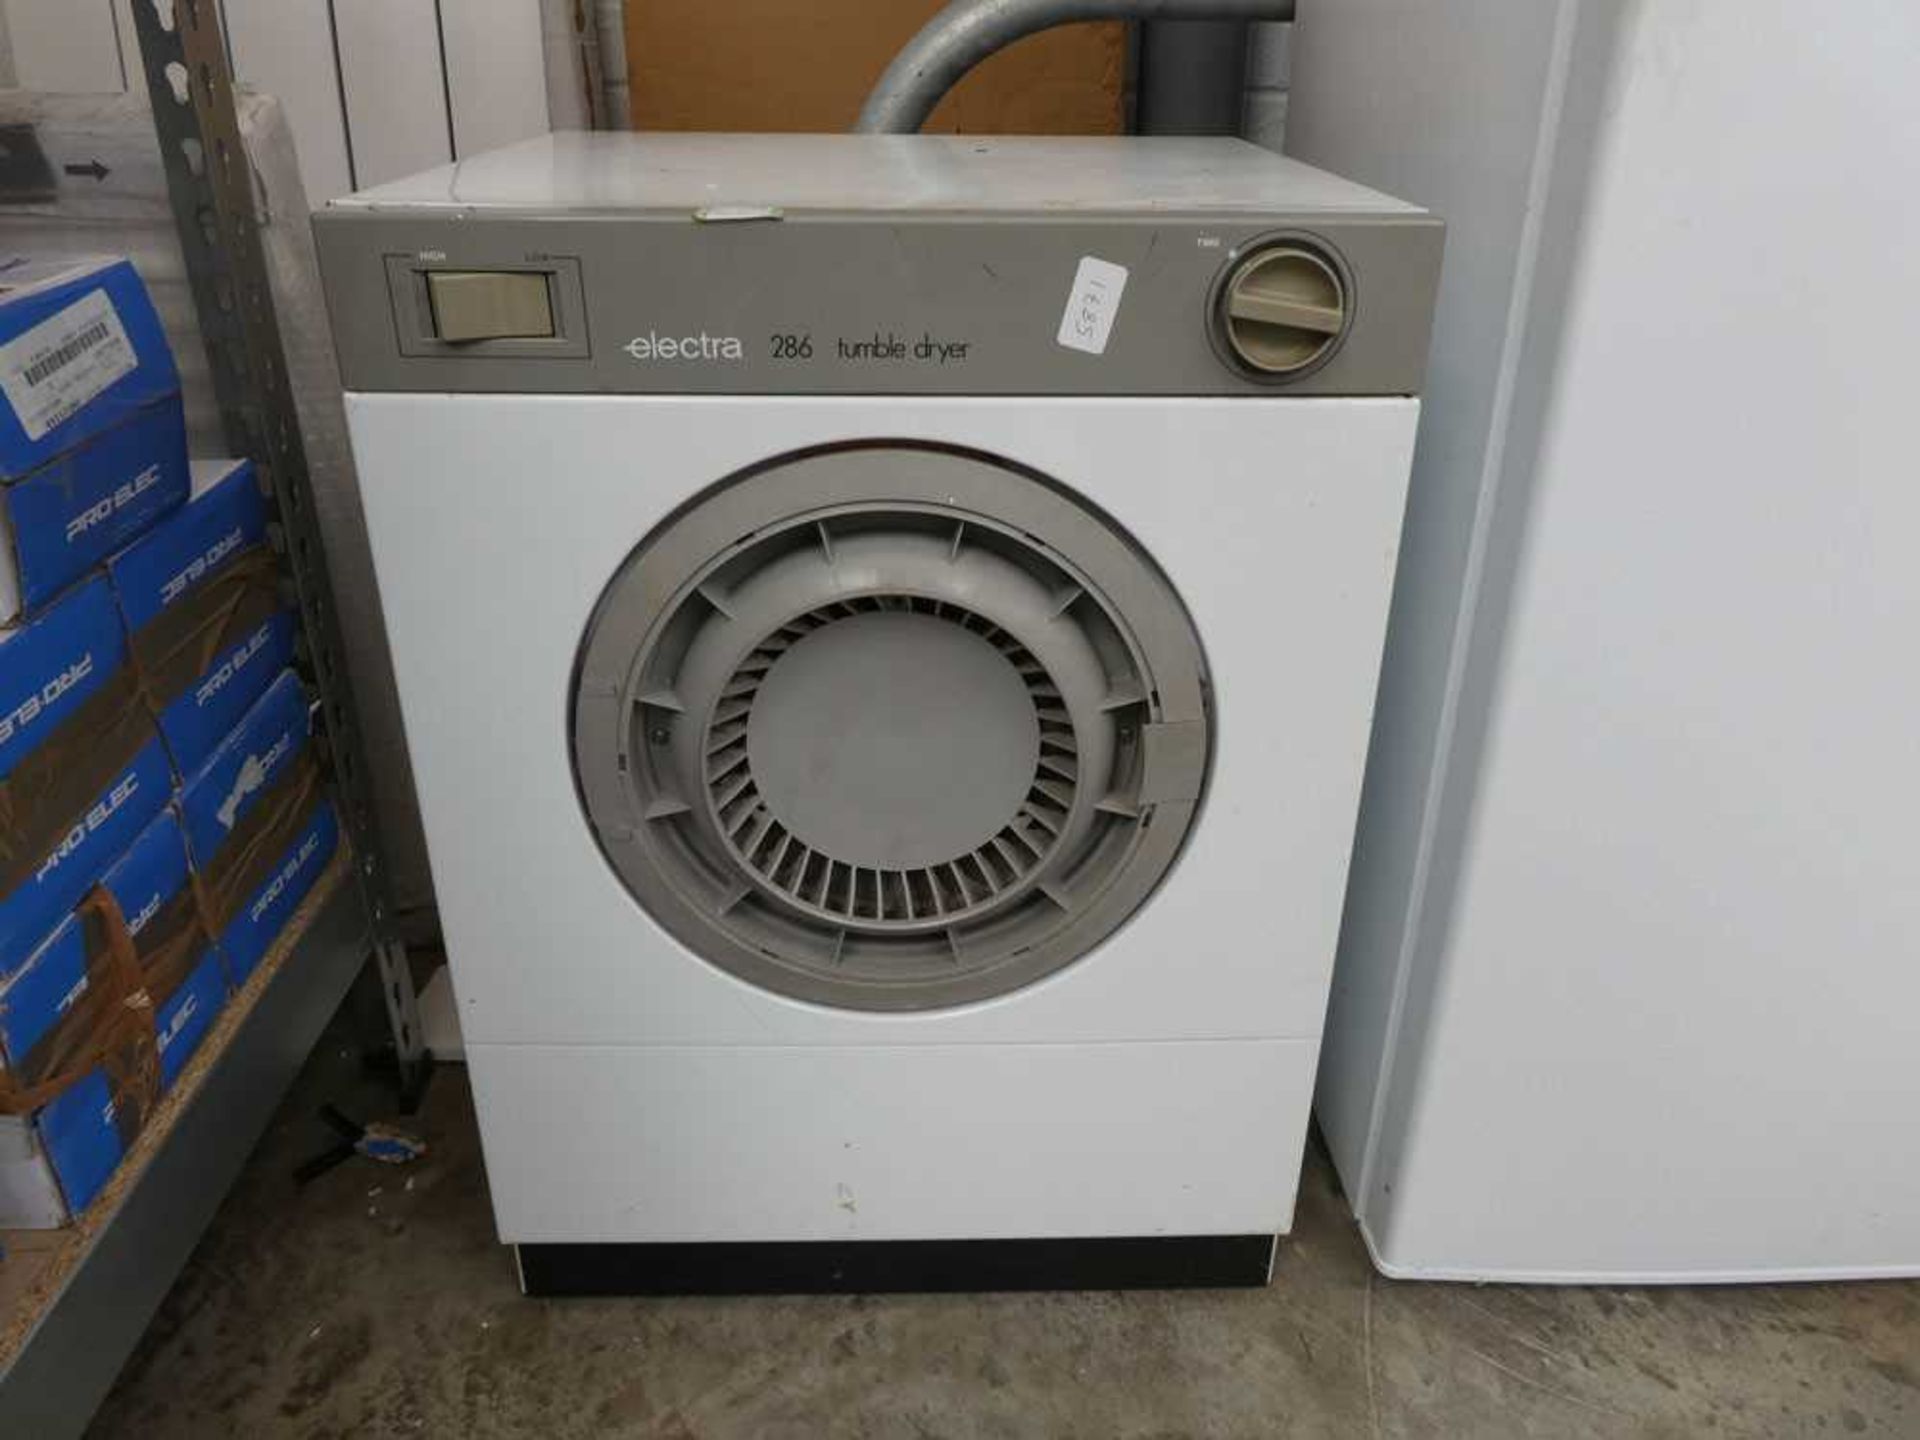 Electra 286 table top tumble dryer